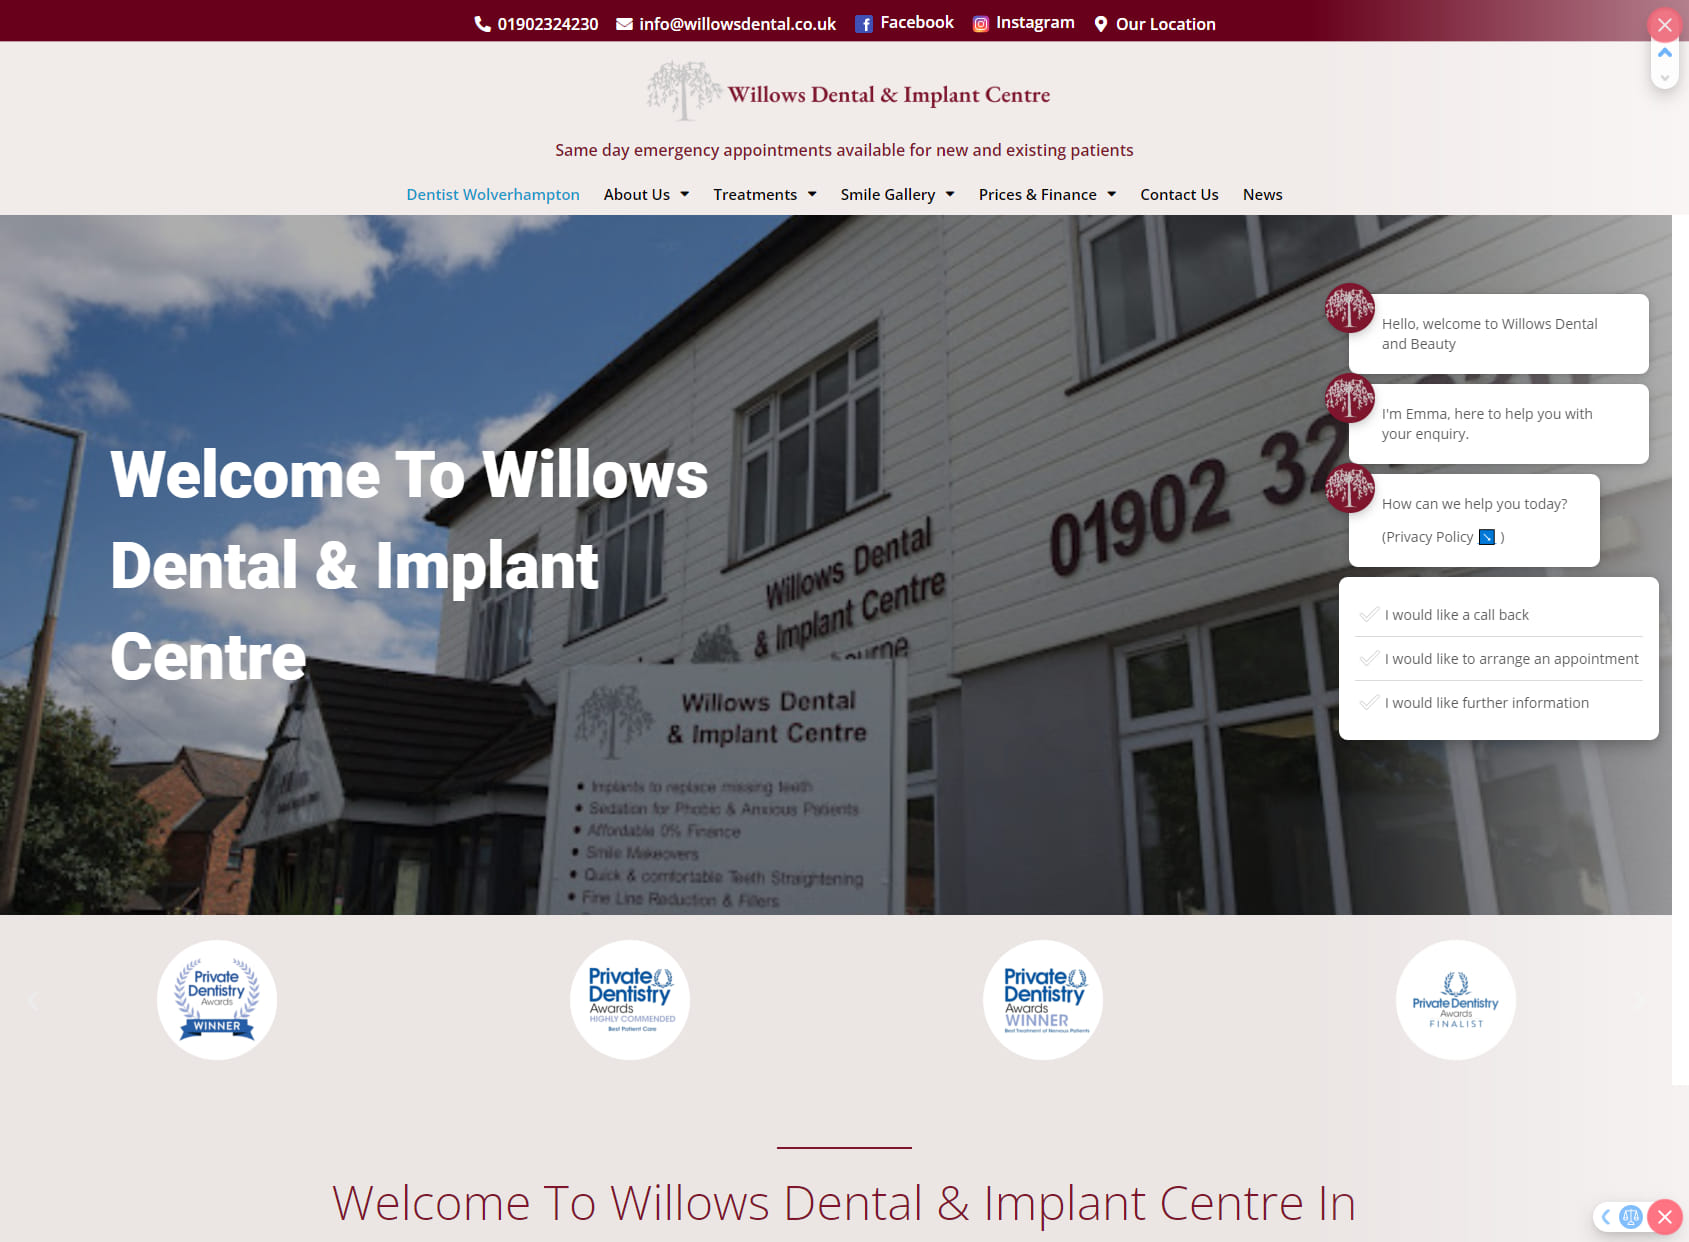 Willows Dental & Implant Centre